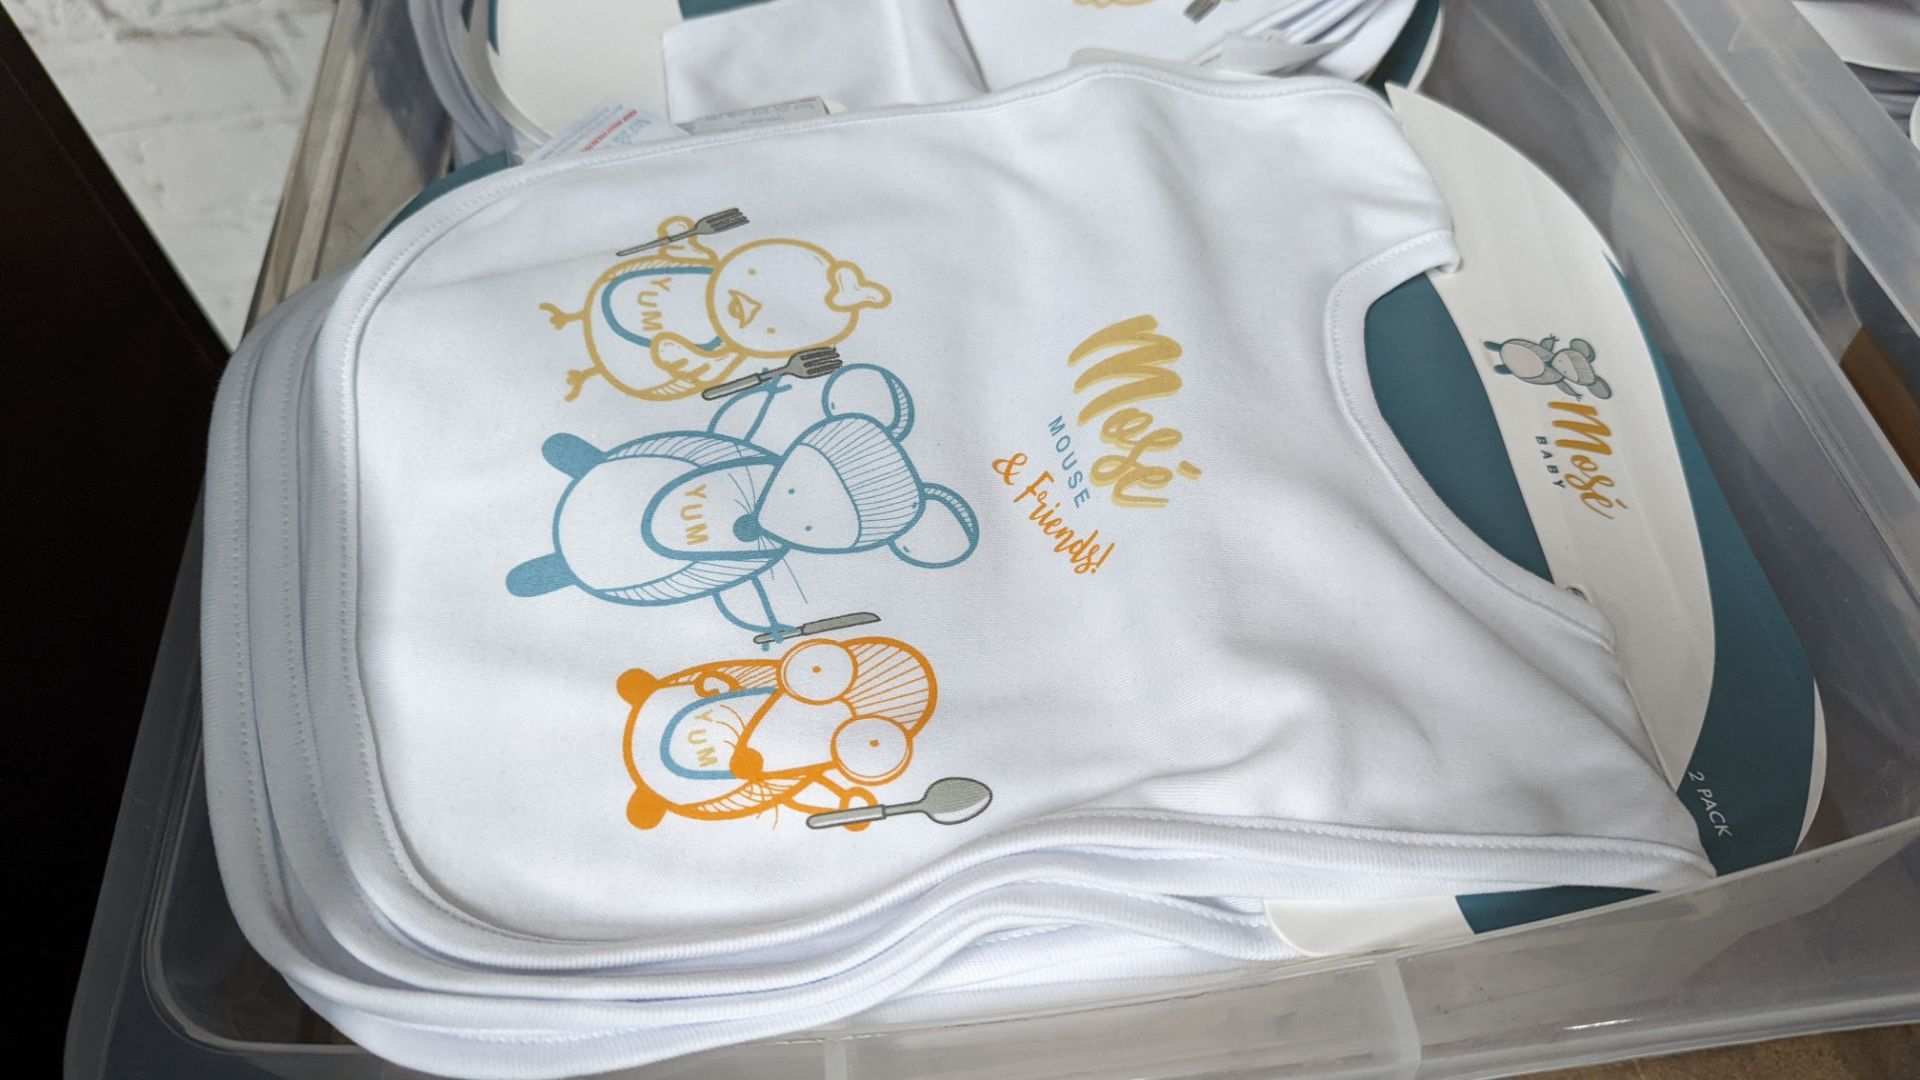 55 off Mosé Baby bibs twin packs. Retail price £10 per twin pack. Each twin pack comprises one pla - Image 4 of 4